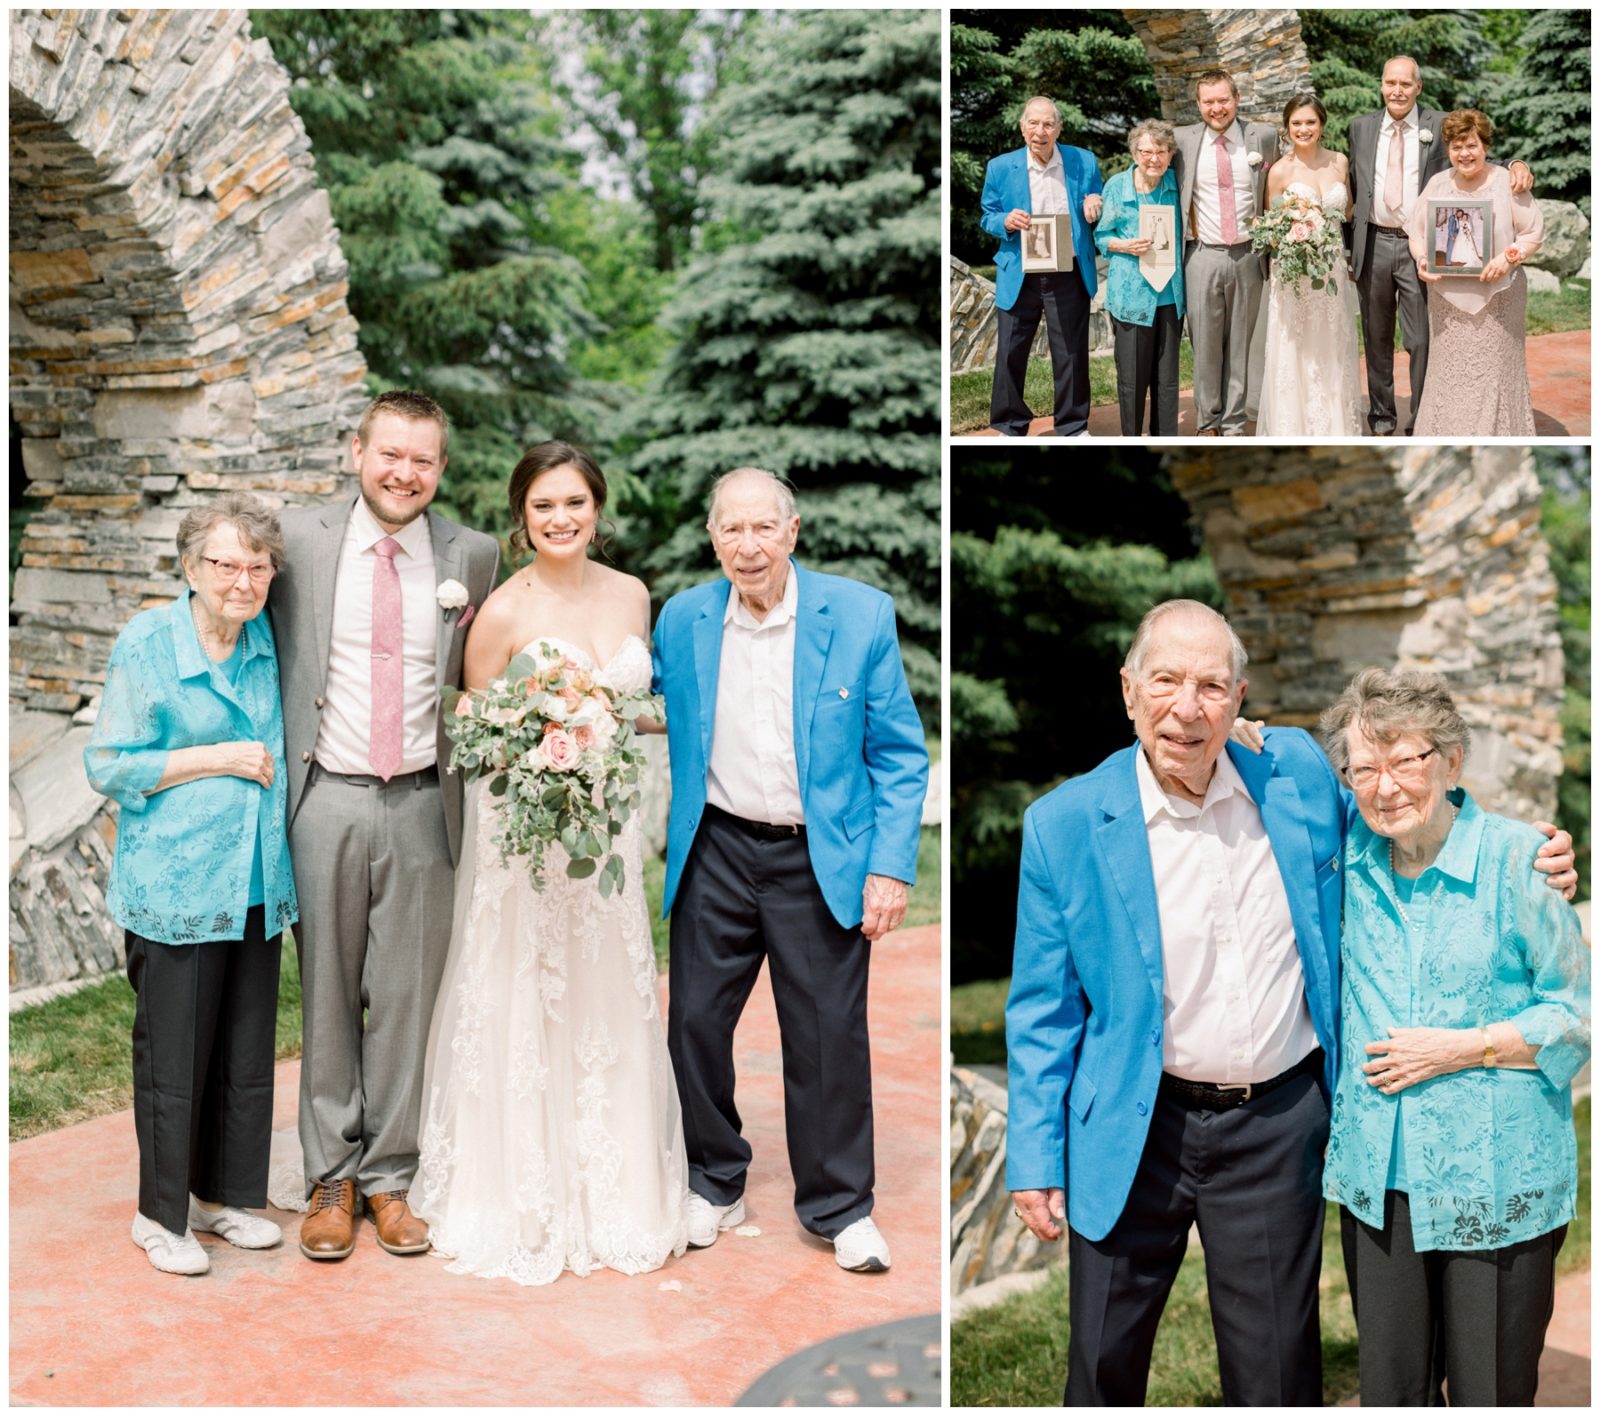 Compilation of photos of the bride and groom with some of their loved ones.